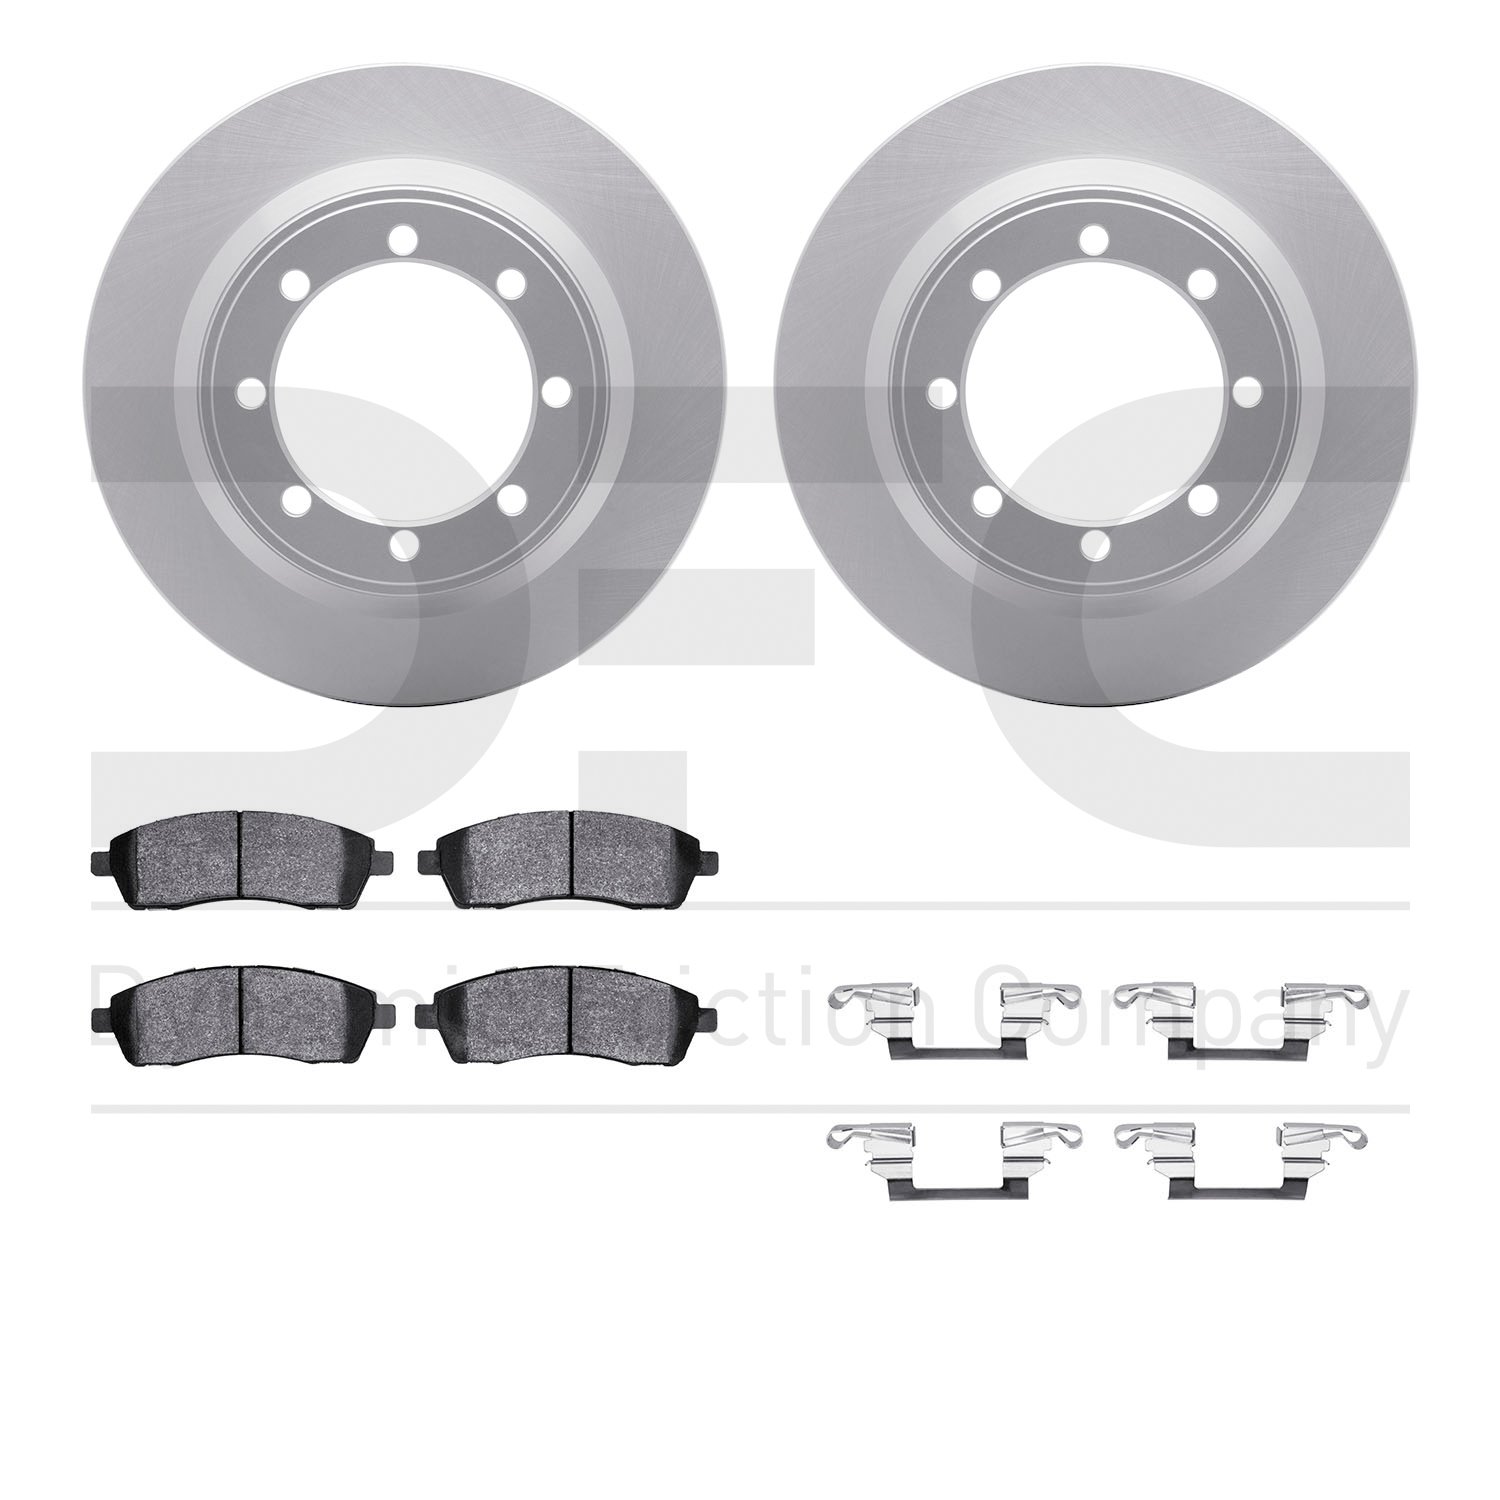 4412-54023 Geospec Brake Rotors with Ultimate-Duty Brake Pads & Hardware, 1999-2004 Ford/Lincoln/Mercury/Mazda, Position: Rear